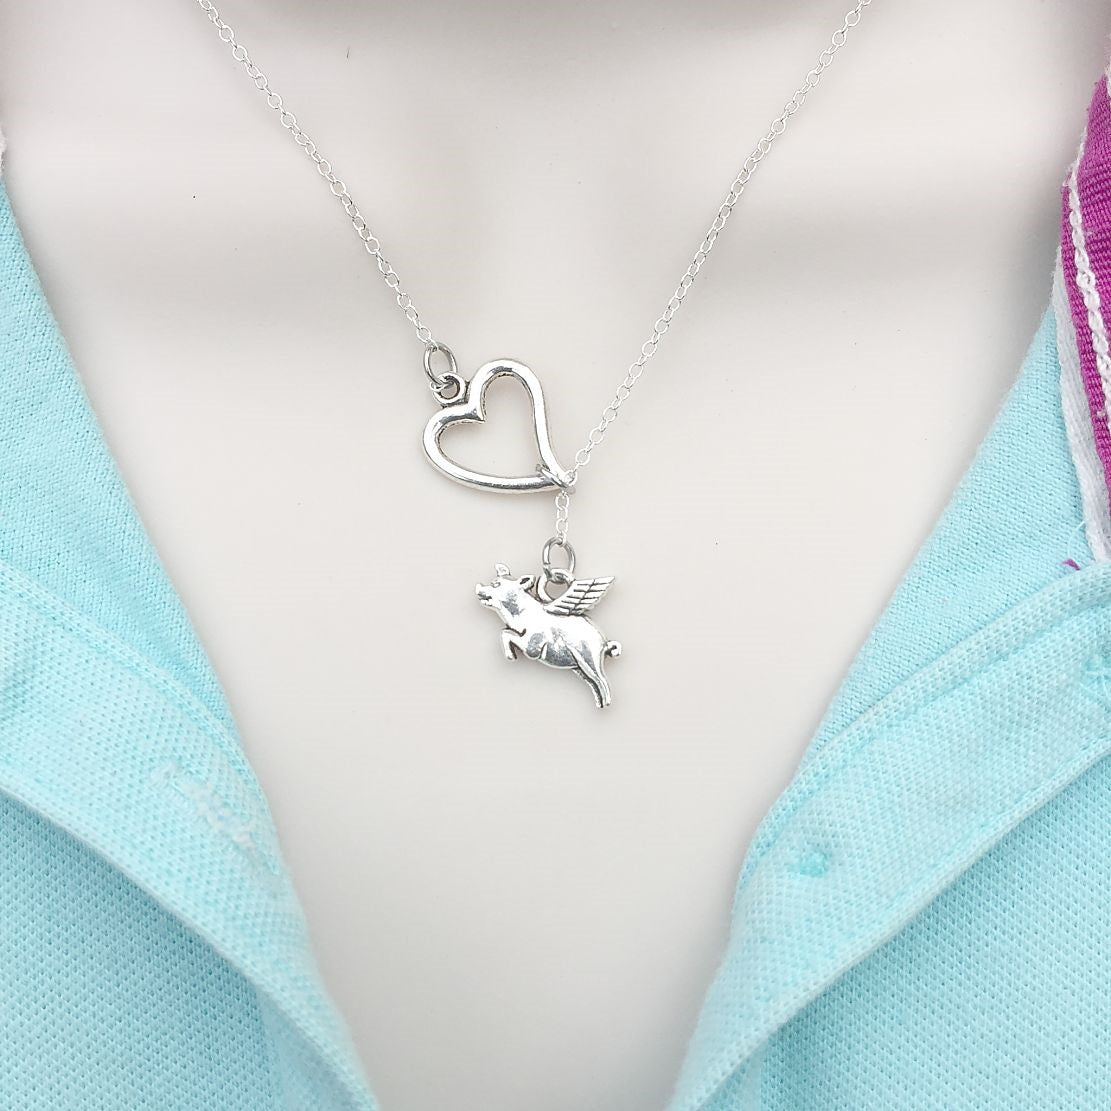 When Pigs Fly Charm Silver Lariat Y Necklace.